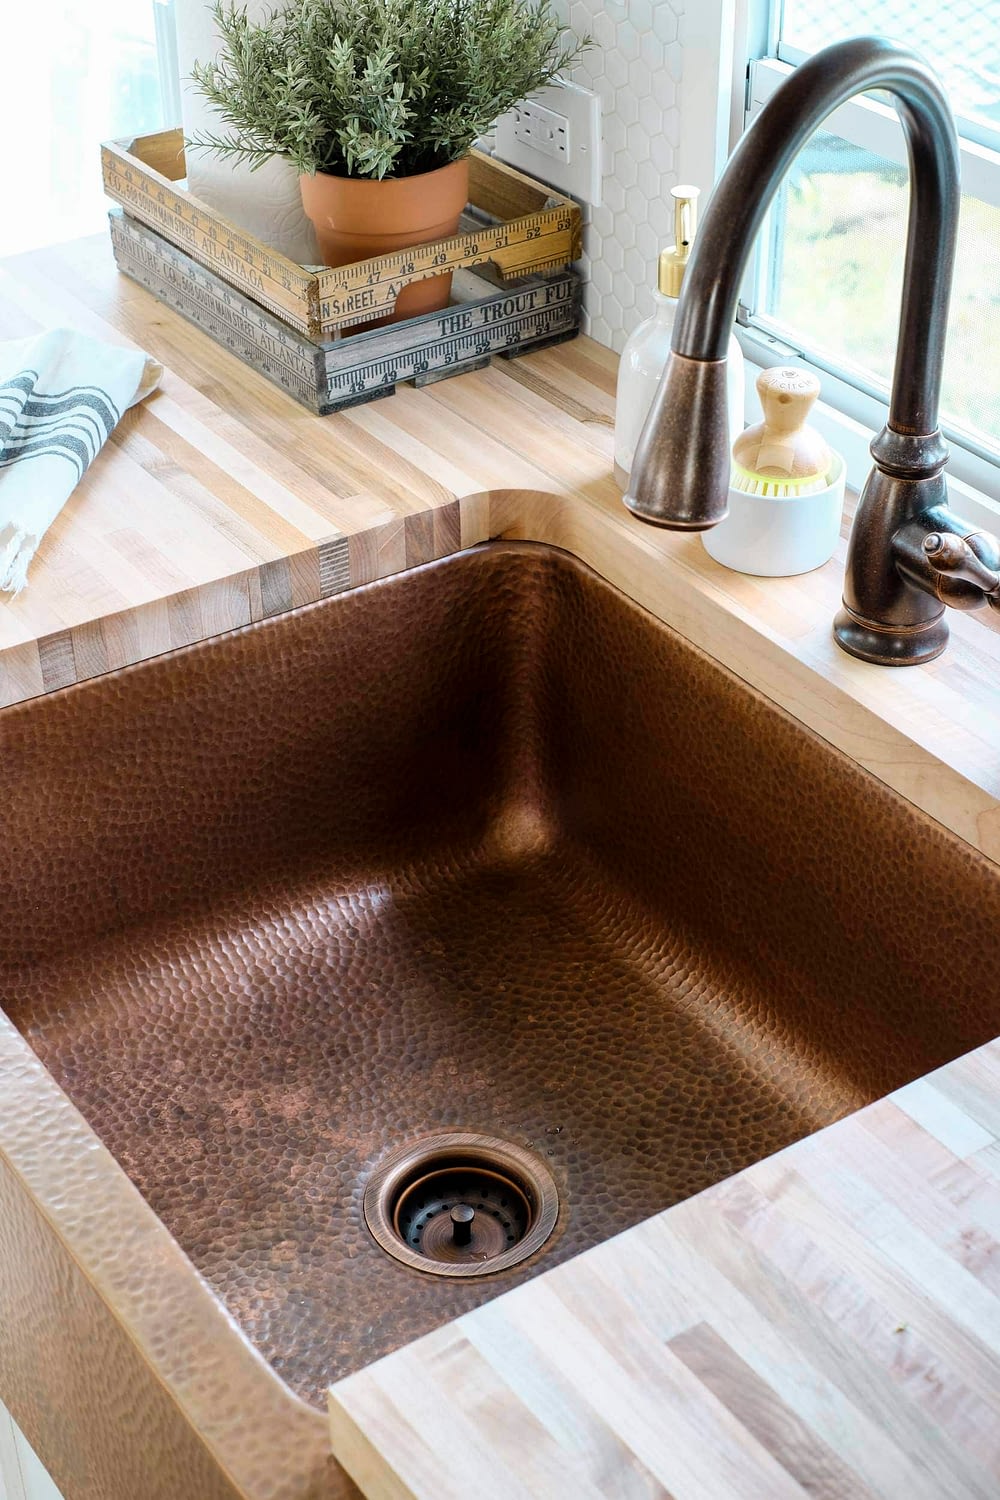 RV kitchen remodel featuring an apron front copper sink